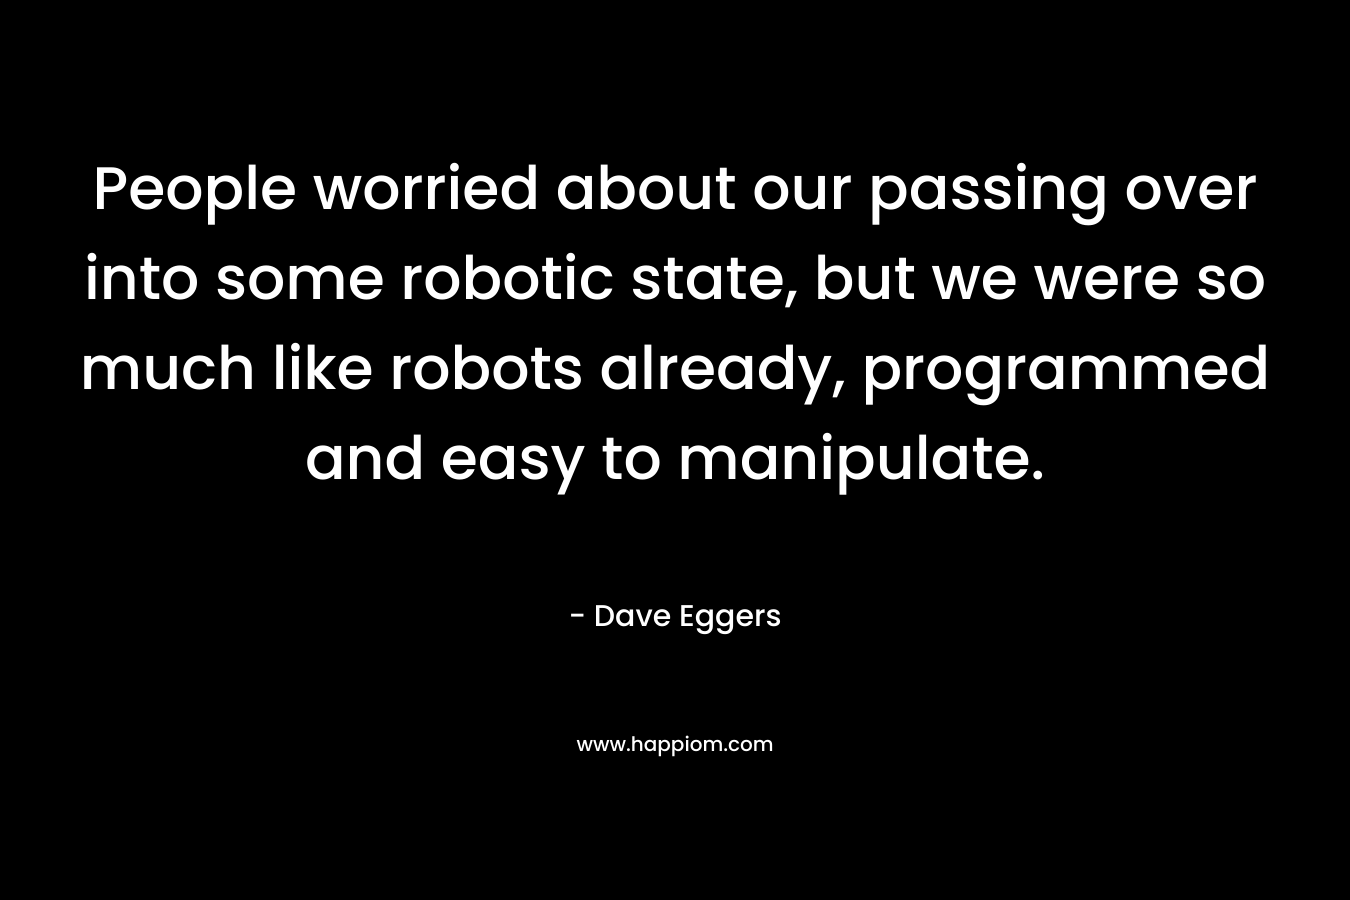 People worried about our passing over into some robotic state, but we were so much like robots already, programmed and easy to manipulate. – Dave Eggers